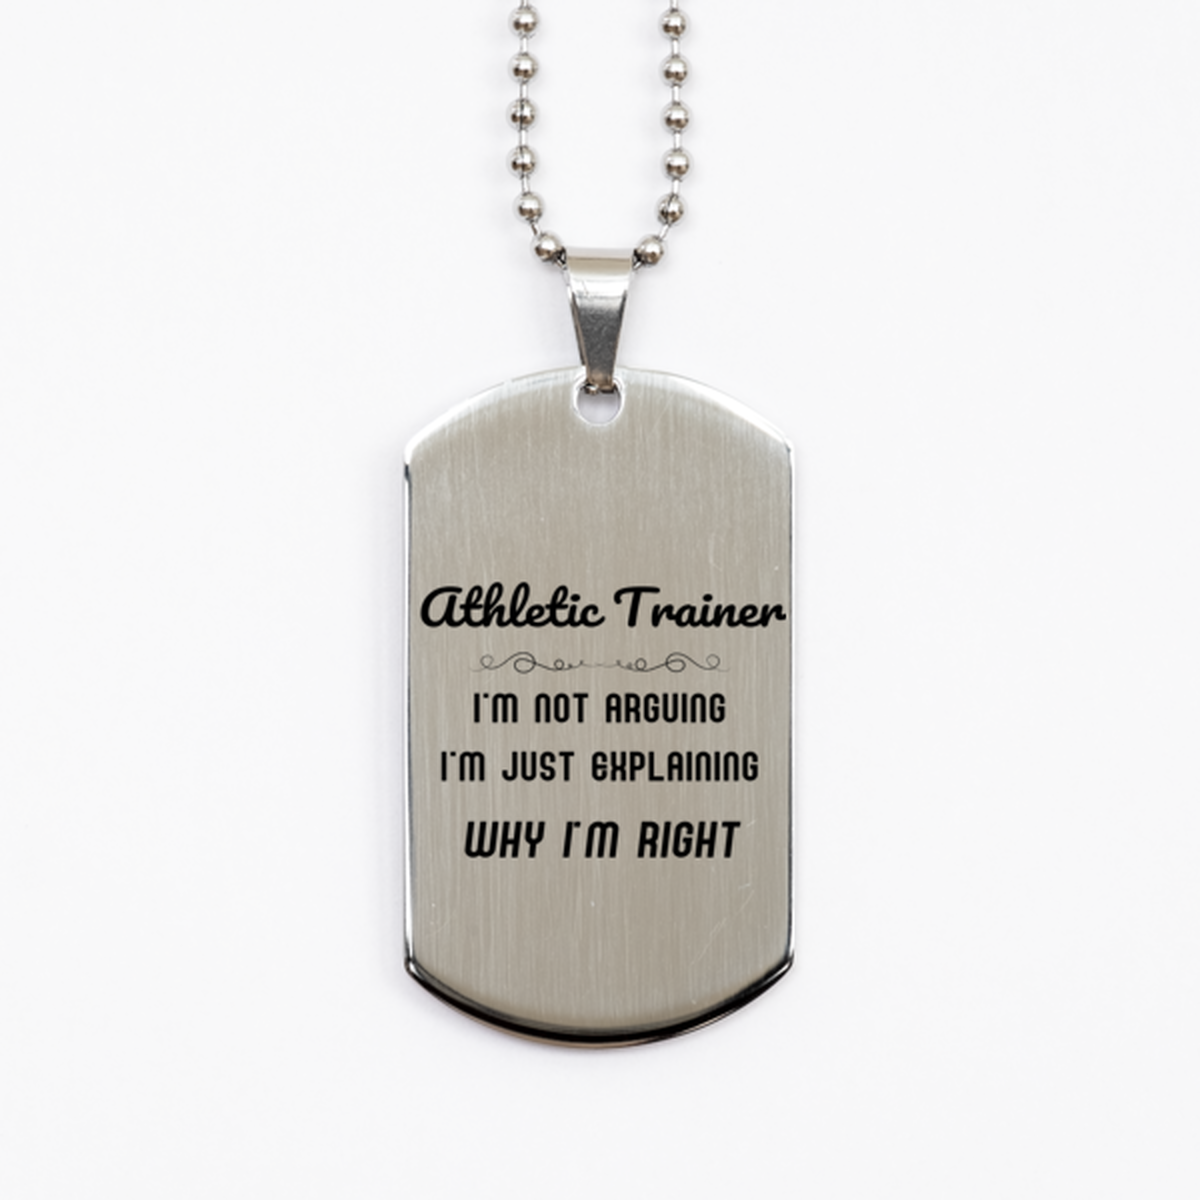 Athletic Trainer I'm not Arguing. I'm Just Explaining Why I'm RIGHT Silver Dog Tag, Funny Saying Quote Athletic Trainer Gifts For Athletic Trainer Graduation Birthday Christmas Gifts for Men Women Coworker